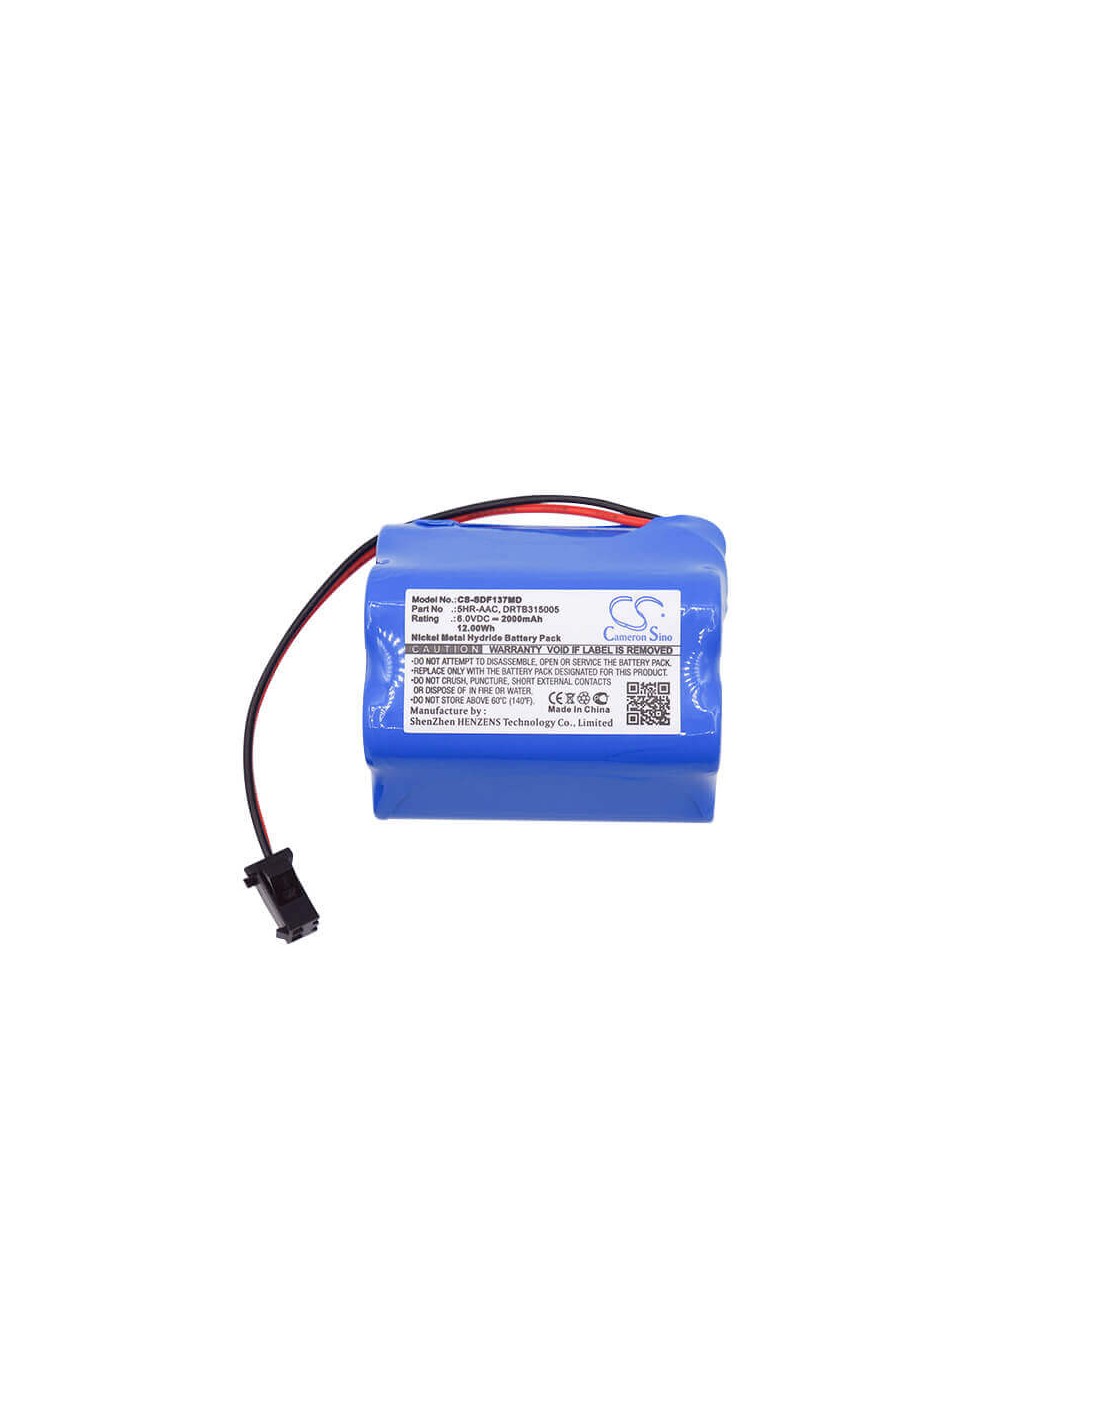 Battery for Sanyo, Mdf-137, Mdf-c8v, Mdf-u333, replaces 5hr-aac 6V, 2000mAh - 12.00Wh